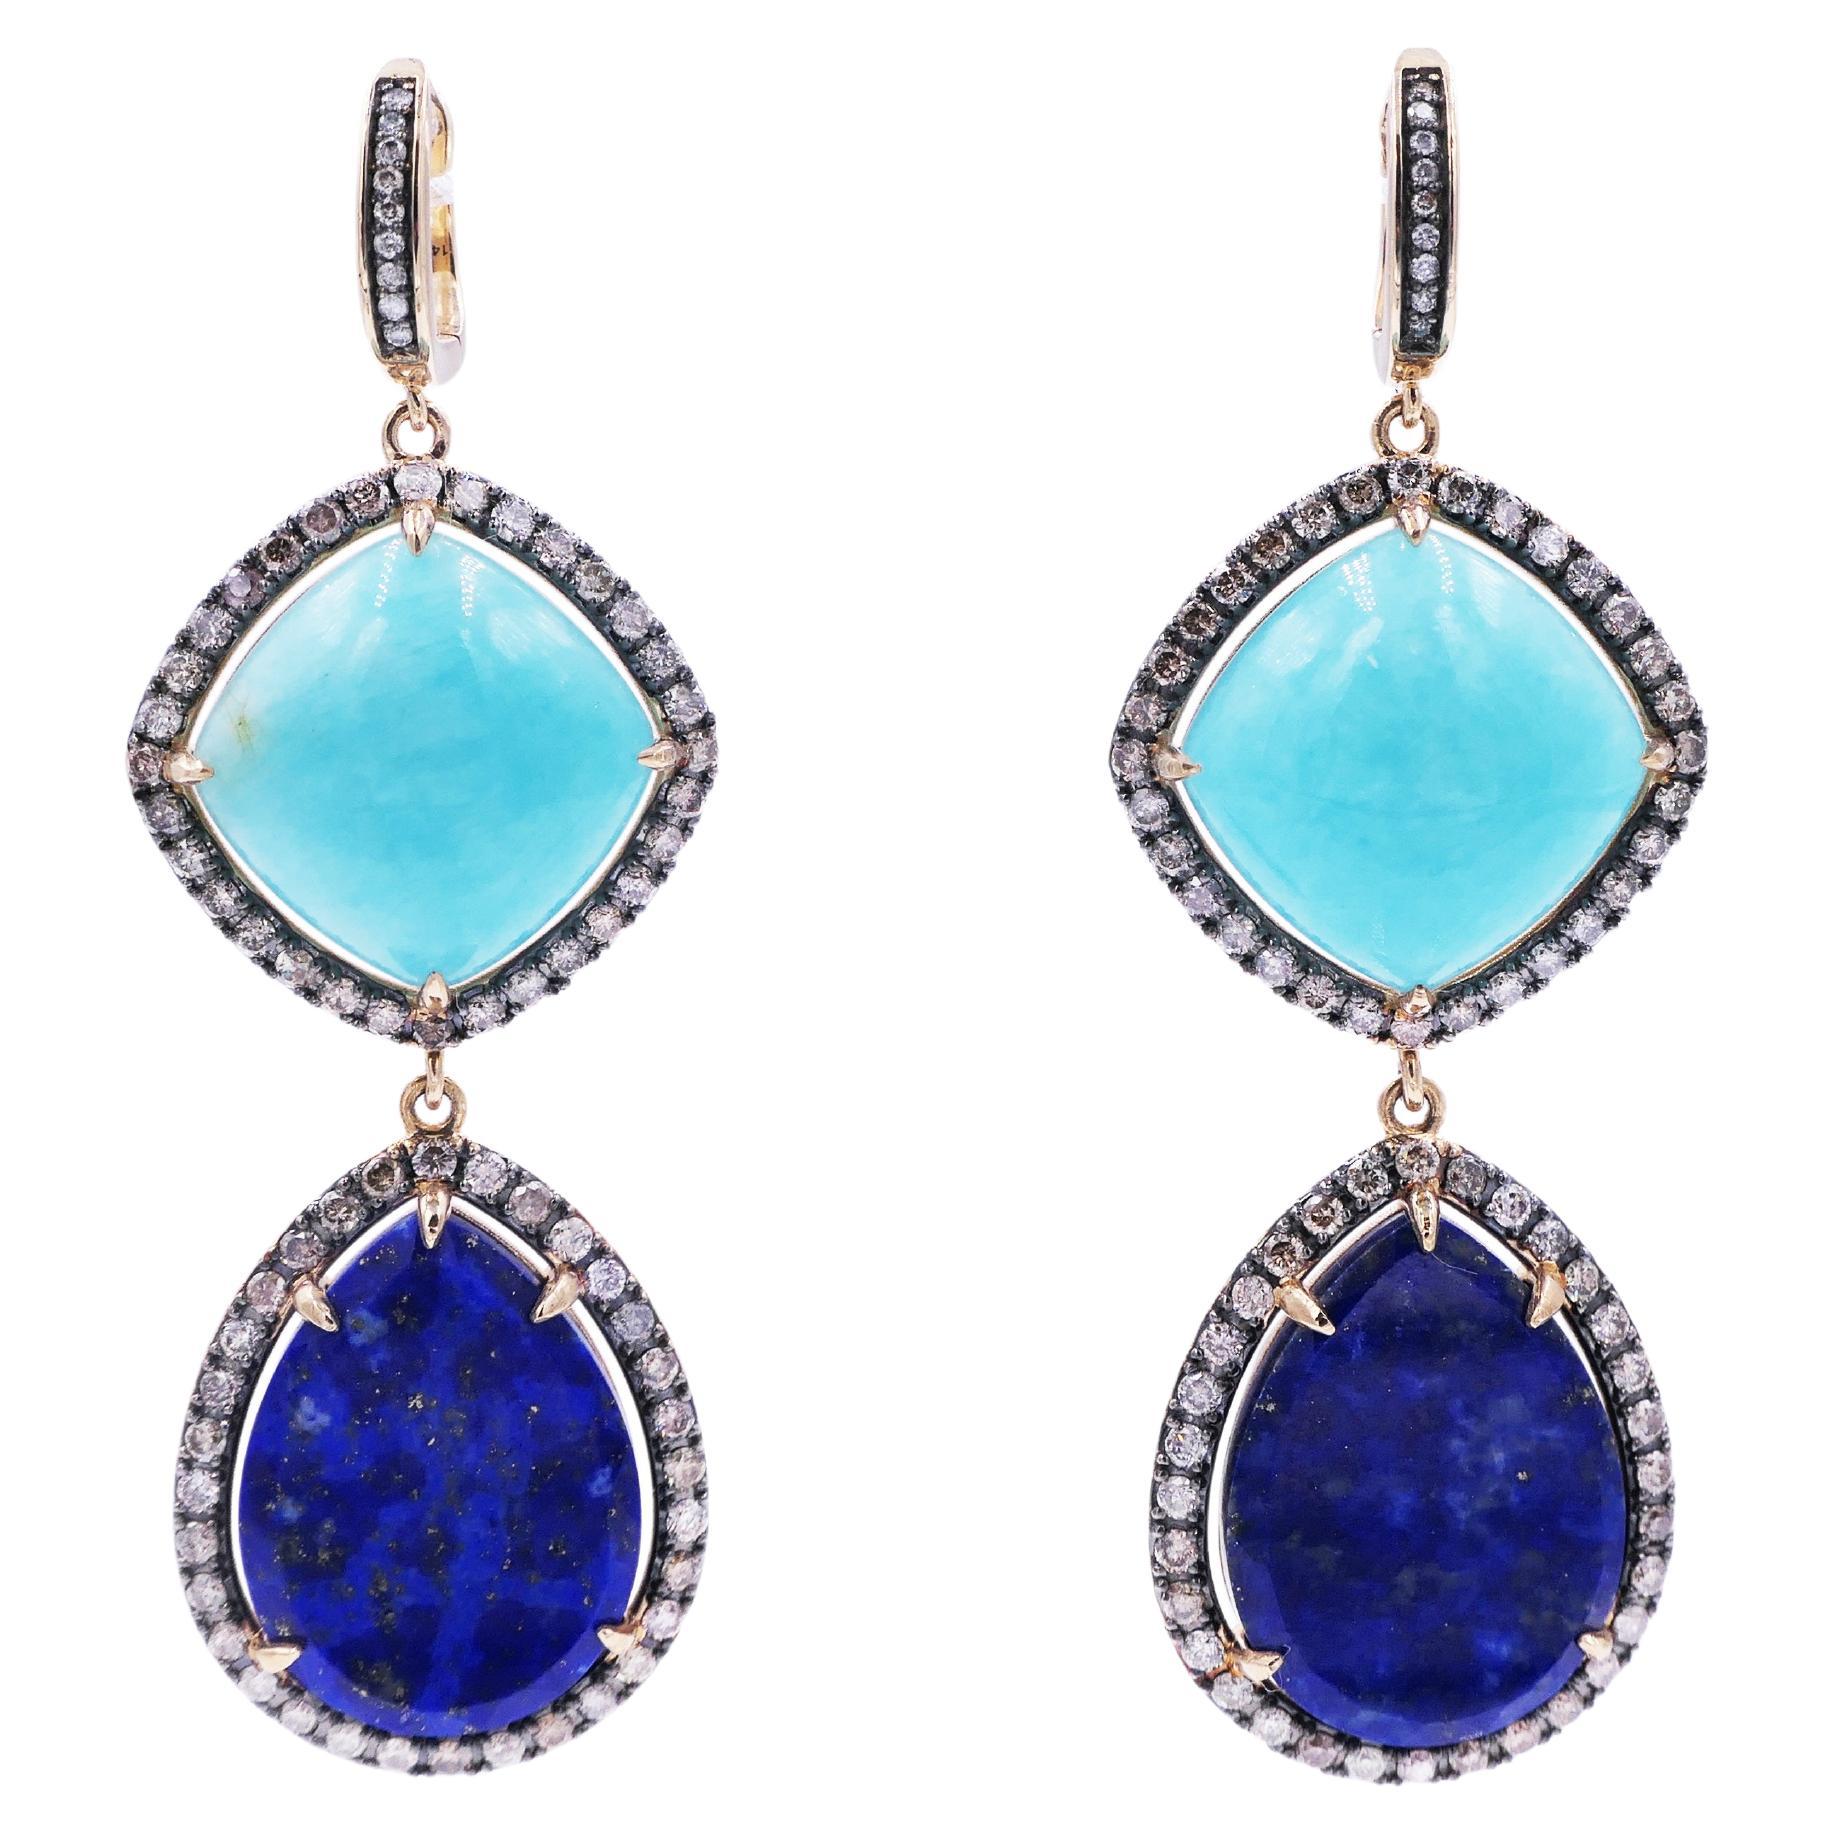 Turquoise Lapis Lazuli Silver Cognac Halo Diamonds 14K Yellow Gold Drop Earrings
14 Karat Yellow Gold
2.00 CT Diamonds
Turquoise & Lapis Lazuli Cabochon Gemstones

Important Information:
Please note that this item will take 2-4 weeks to deliver - it